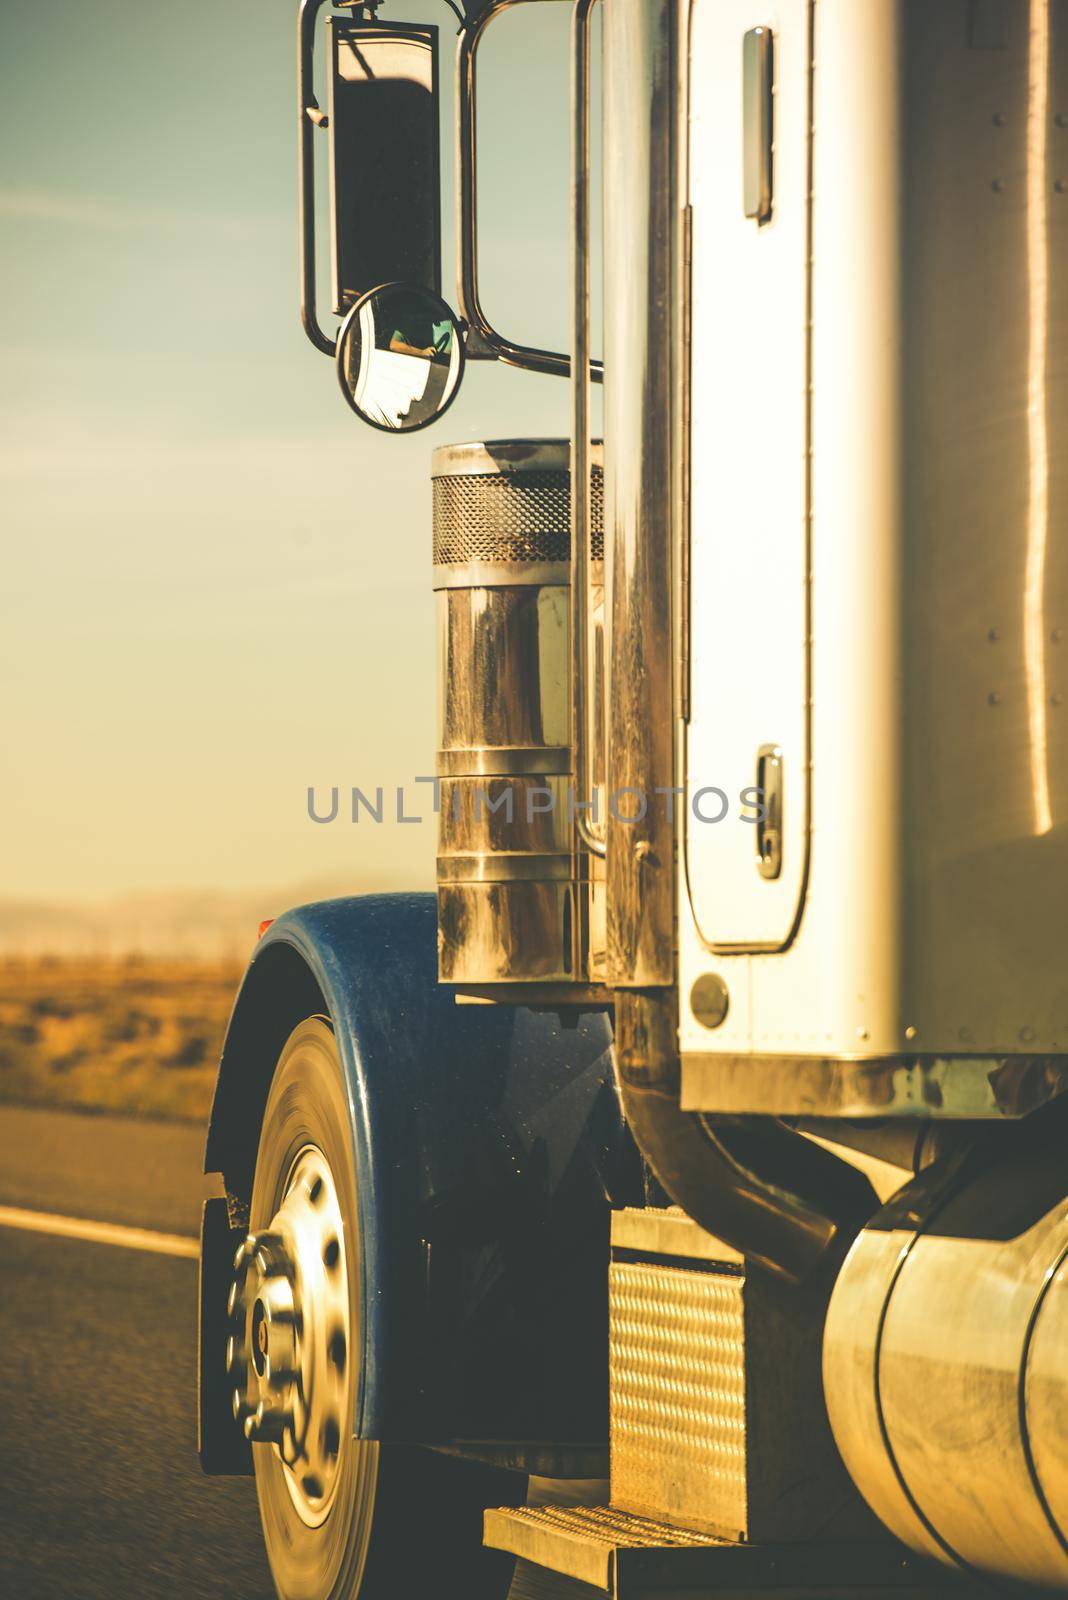 Semi Truck Tractor Closeup on the Highway in Vertical Photography. by welcomia